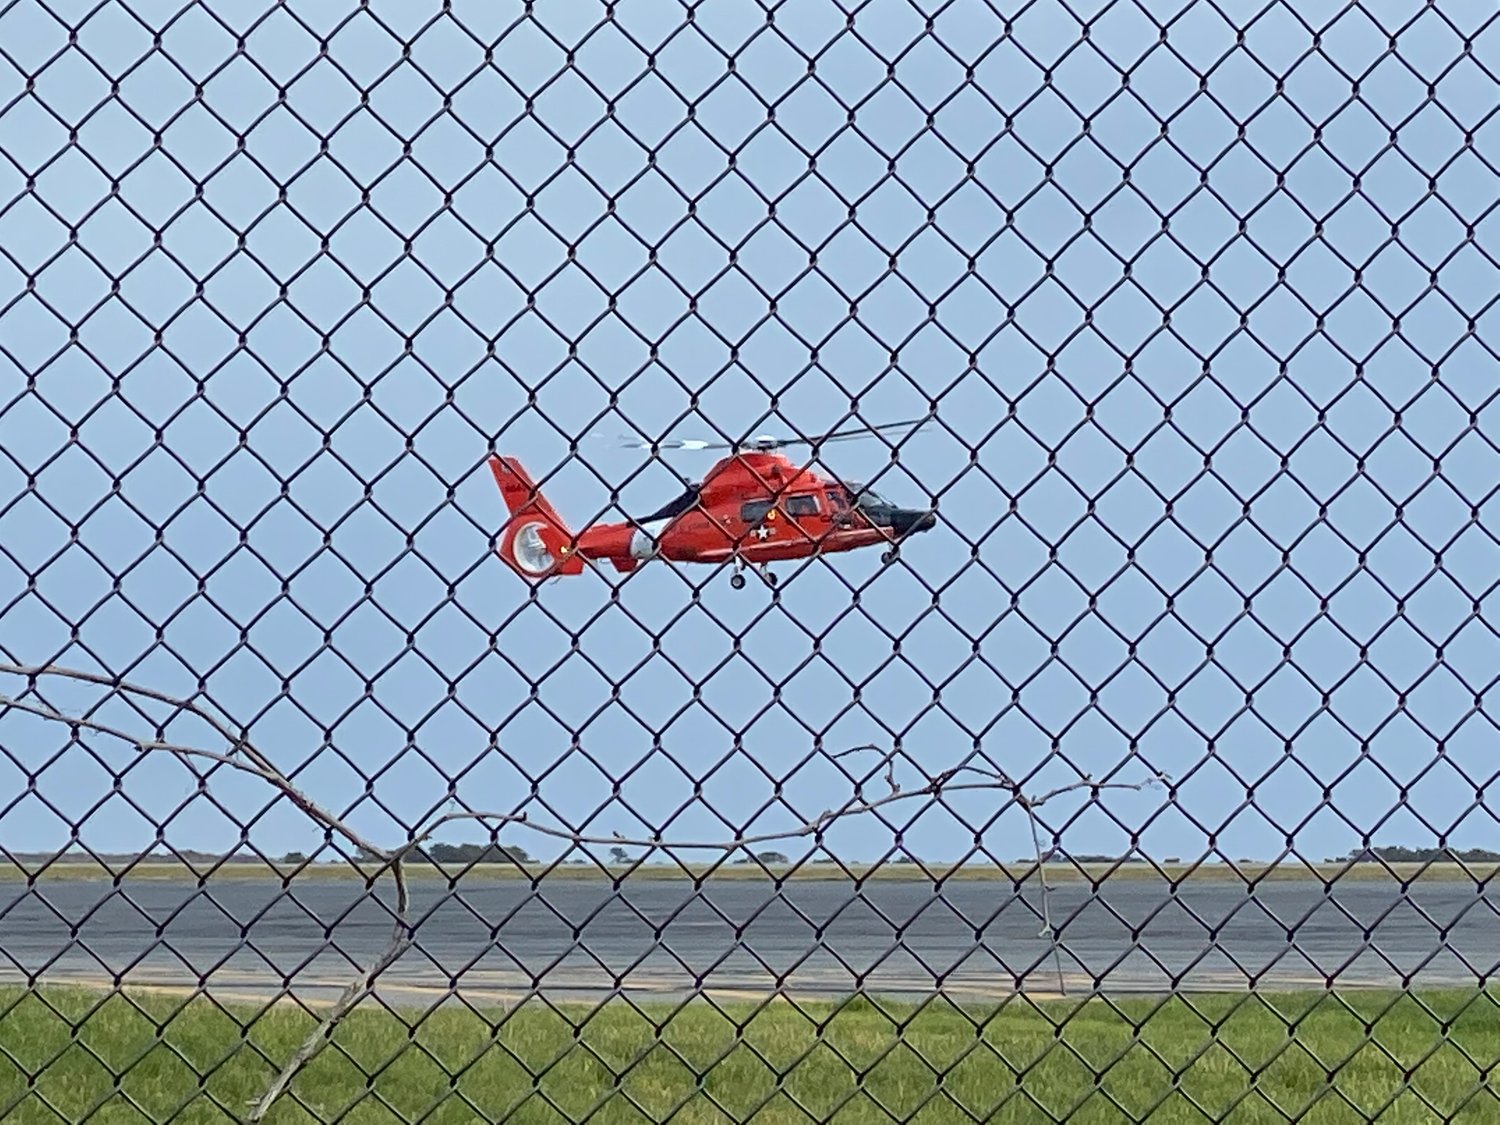 A U.S. Coast Guard helicopter lands at Nantucket Memorial Airport Sunday afternoon.